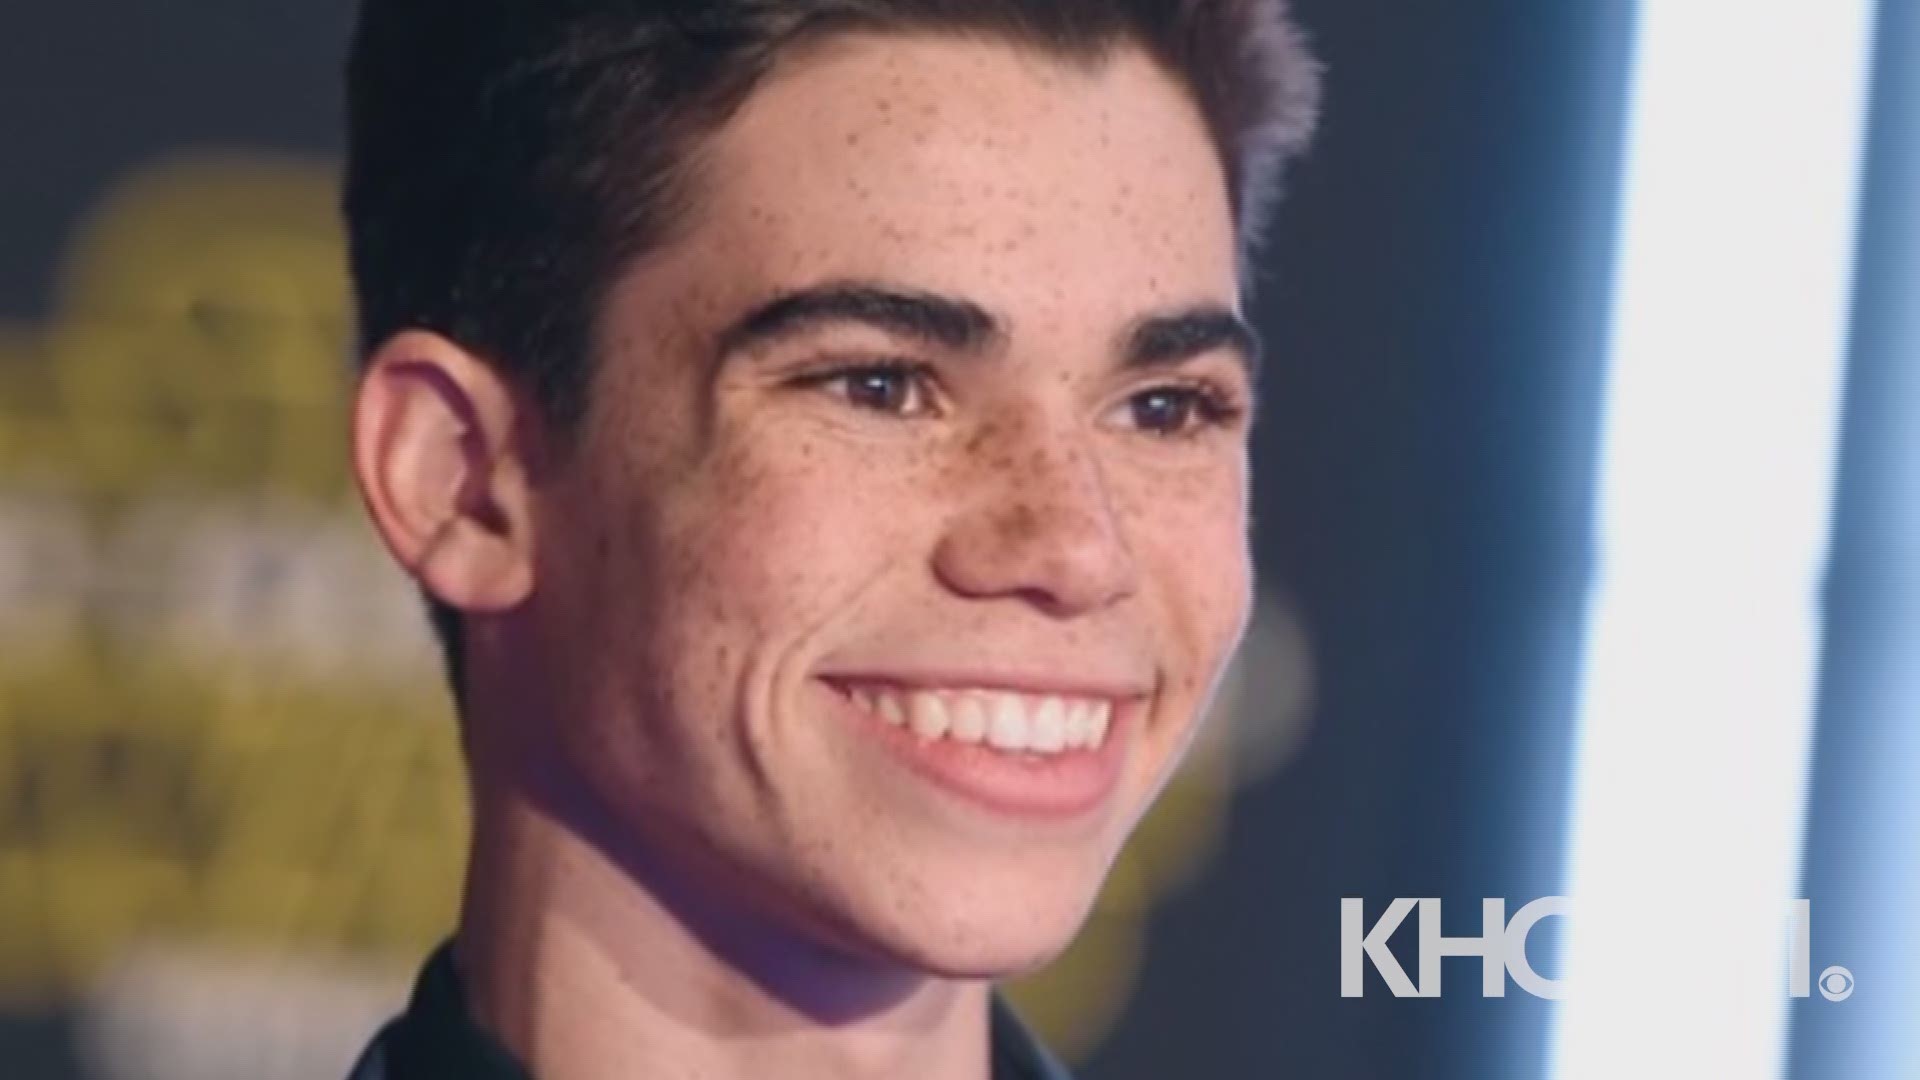 Cameron Boyce, a young star who appeared in several Disney Channel television shows and movies, has died. He was 20 years old.